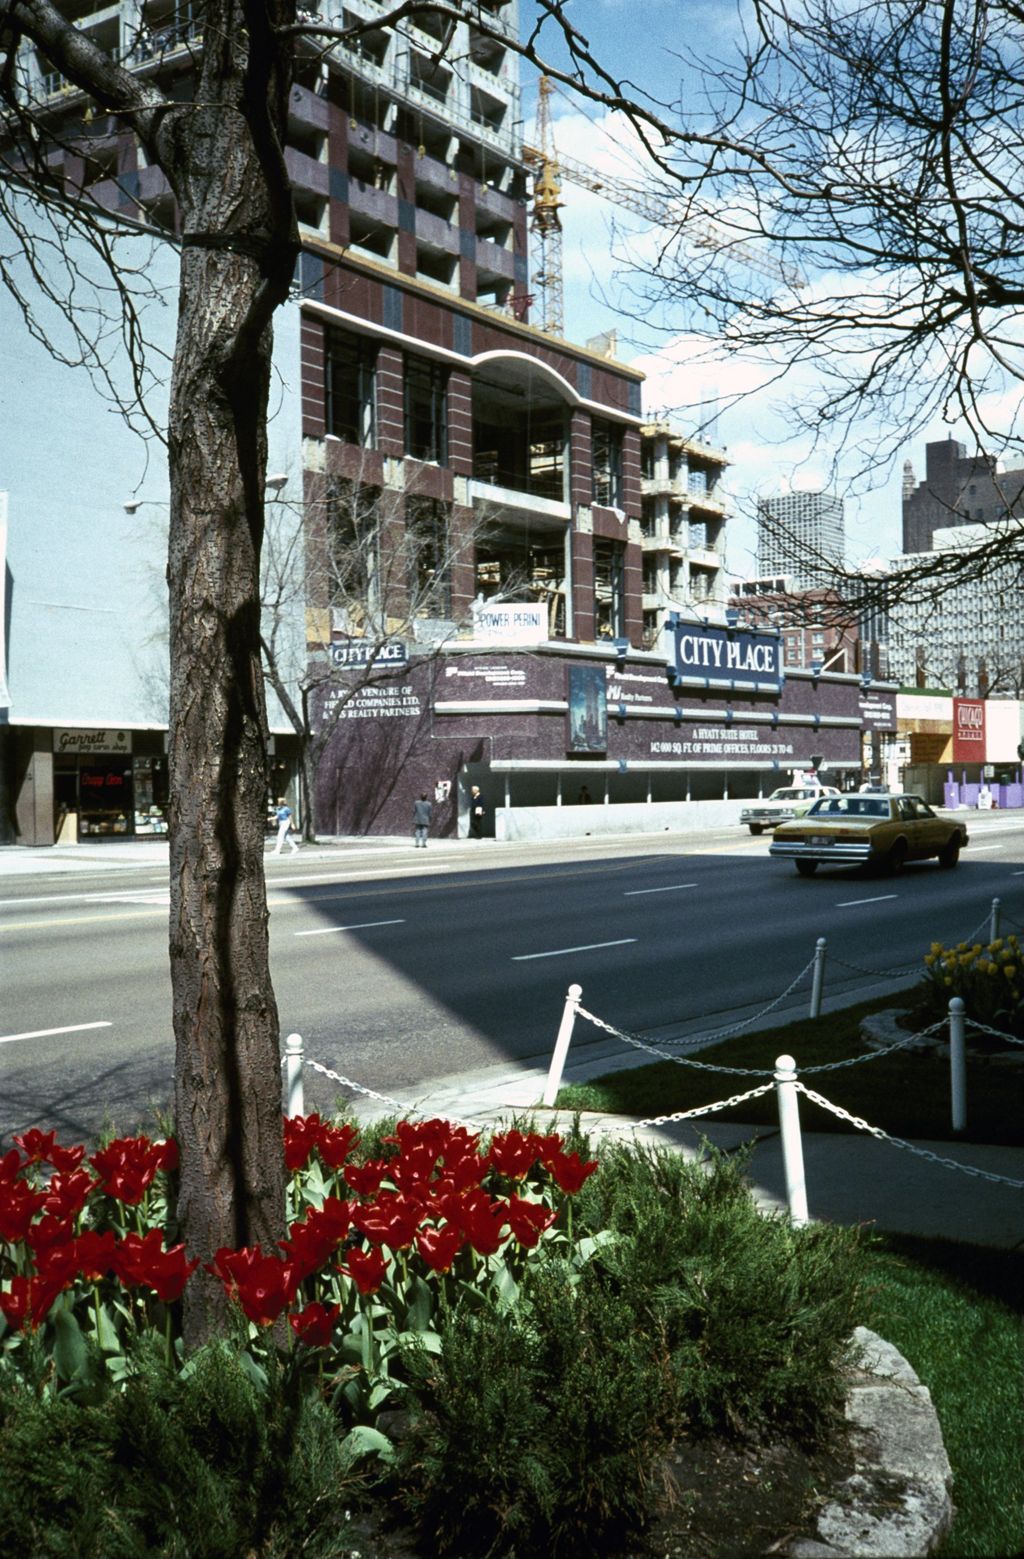 Miniature of City Place Hotel under construction